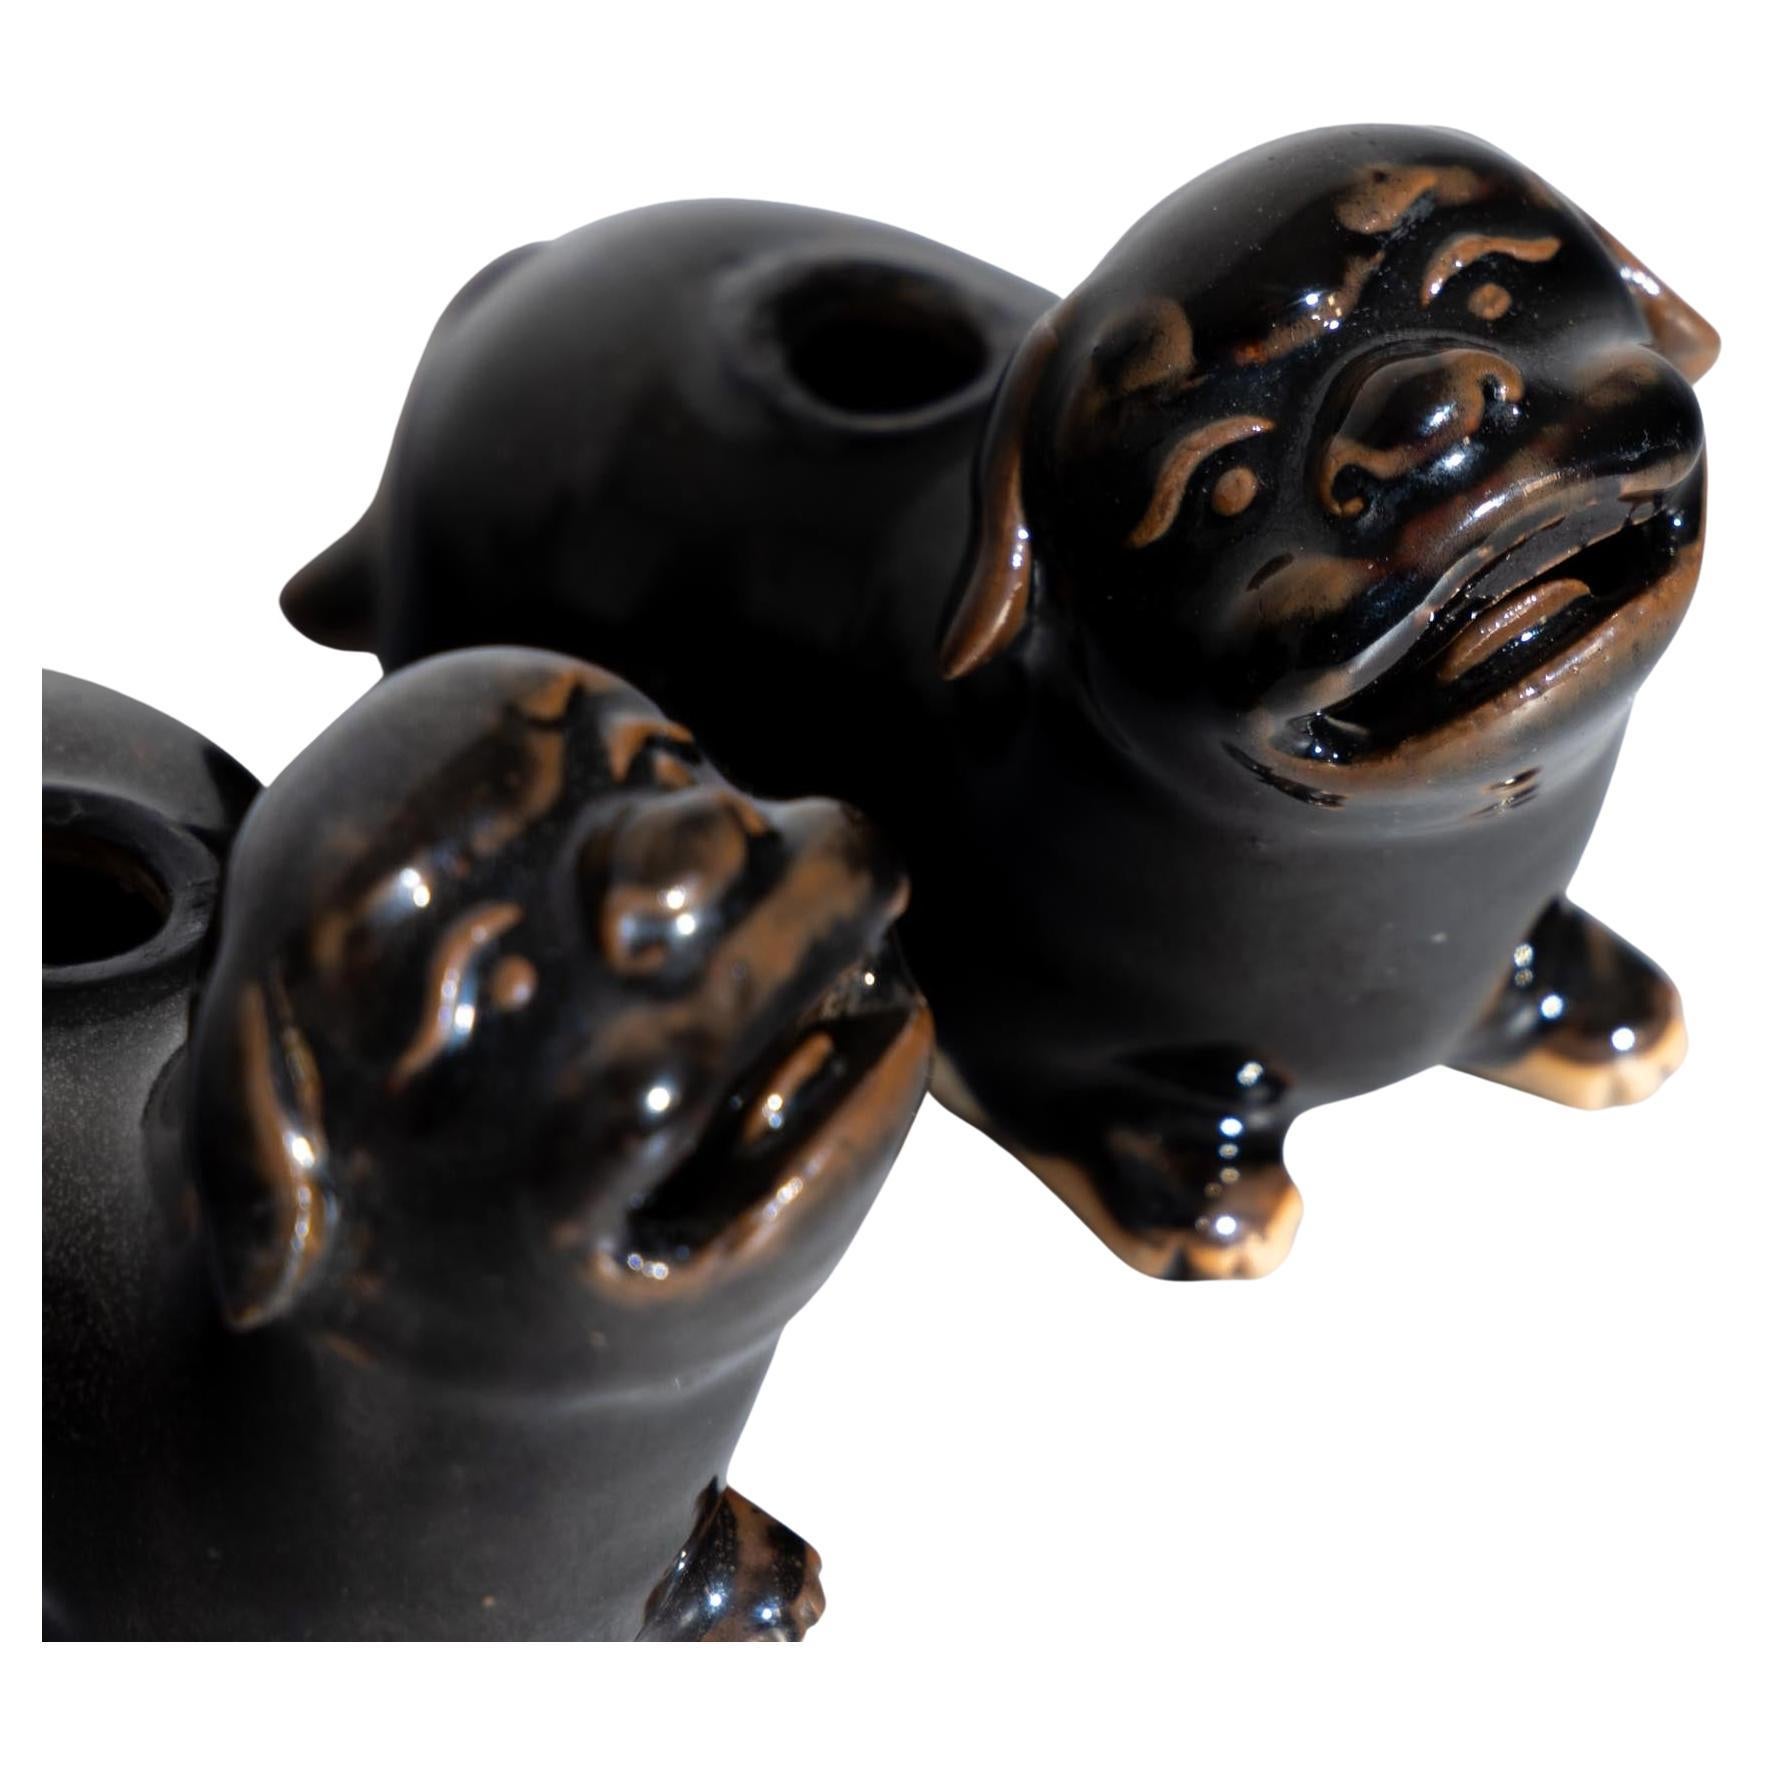 Pair of small Chinese guardian lions or Foo Dogs made of dark brown glazed ceramic. The lions have a round opening for pen holders in the back. A pair of friendly faces waiting to guard the workplace.